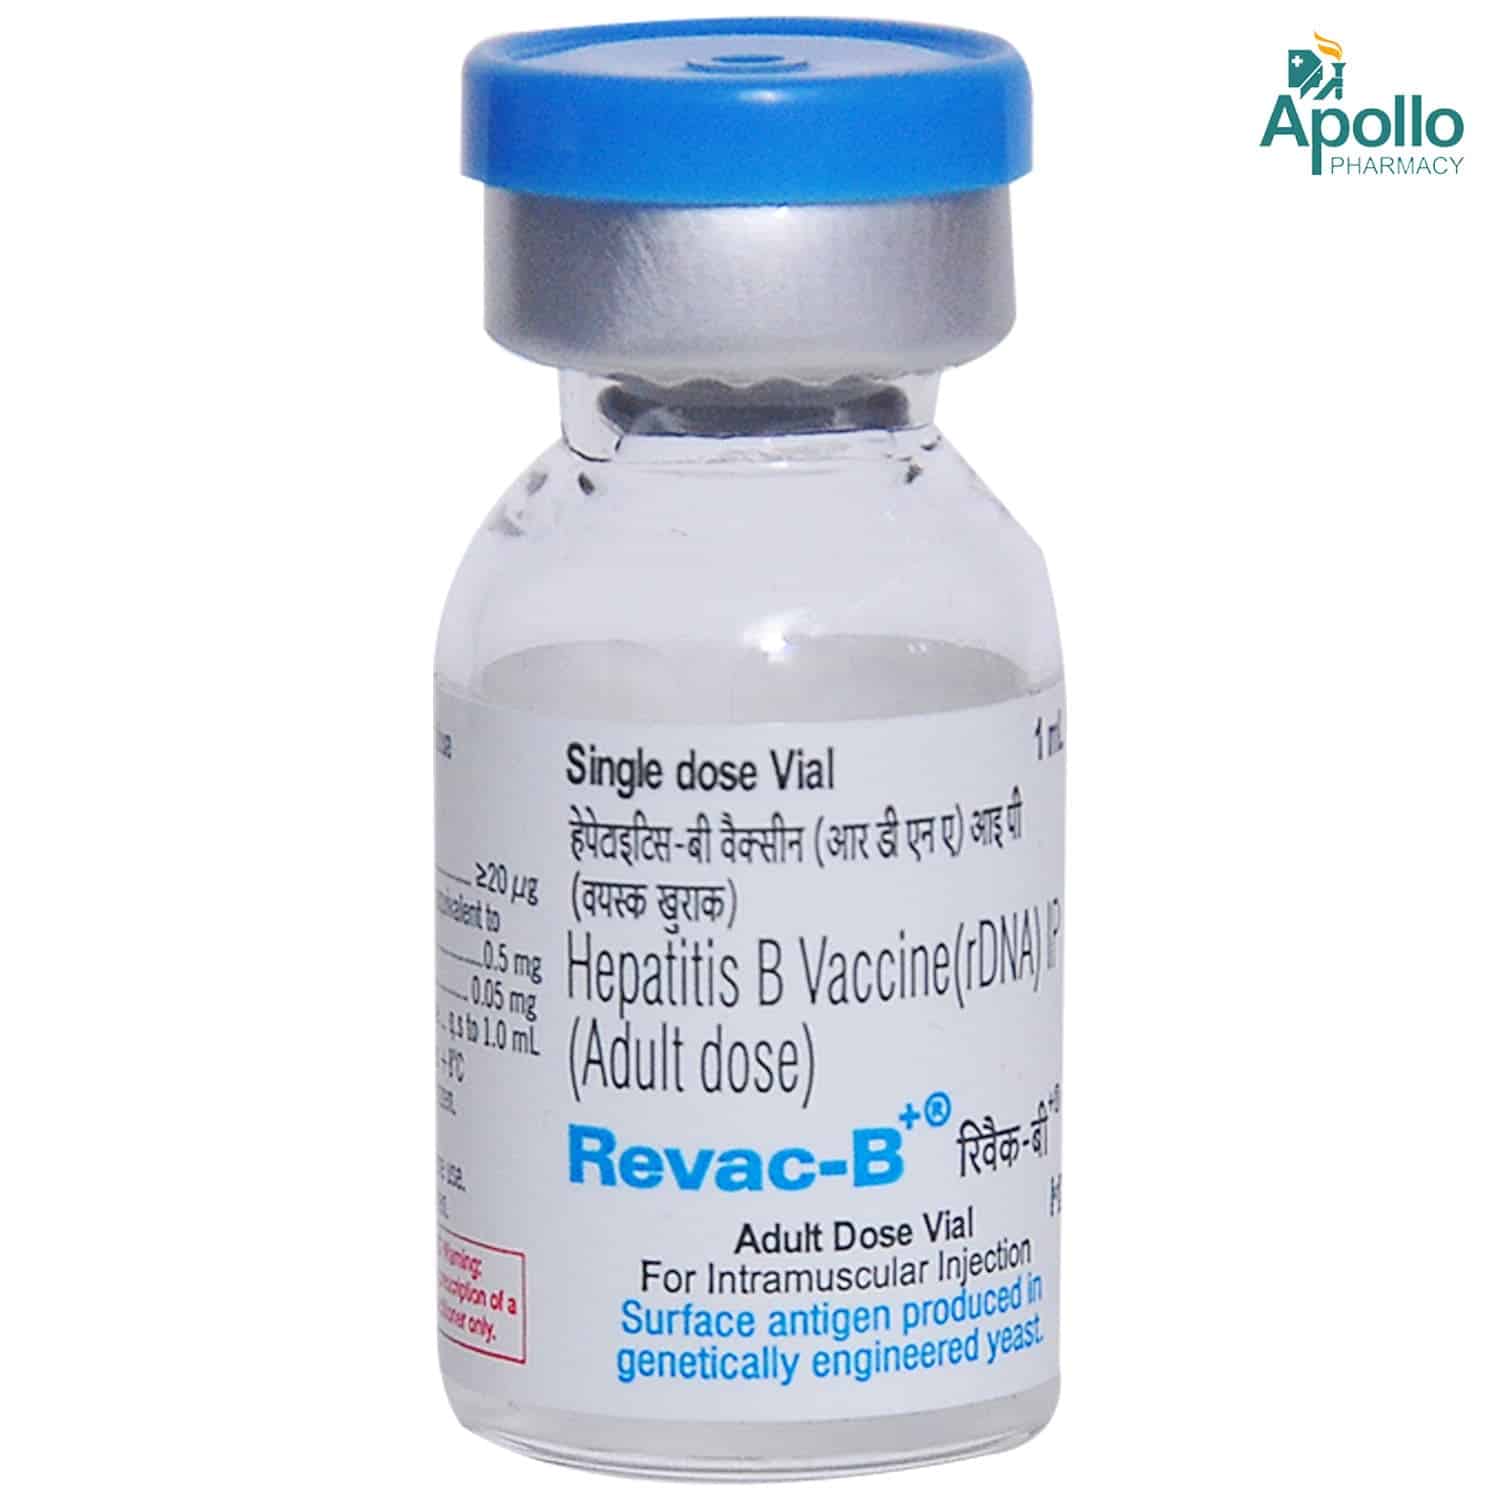 REVAC B INJECTION 1ML Price, Uses, Side Effects, Composition